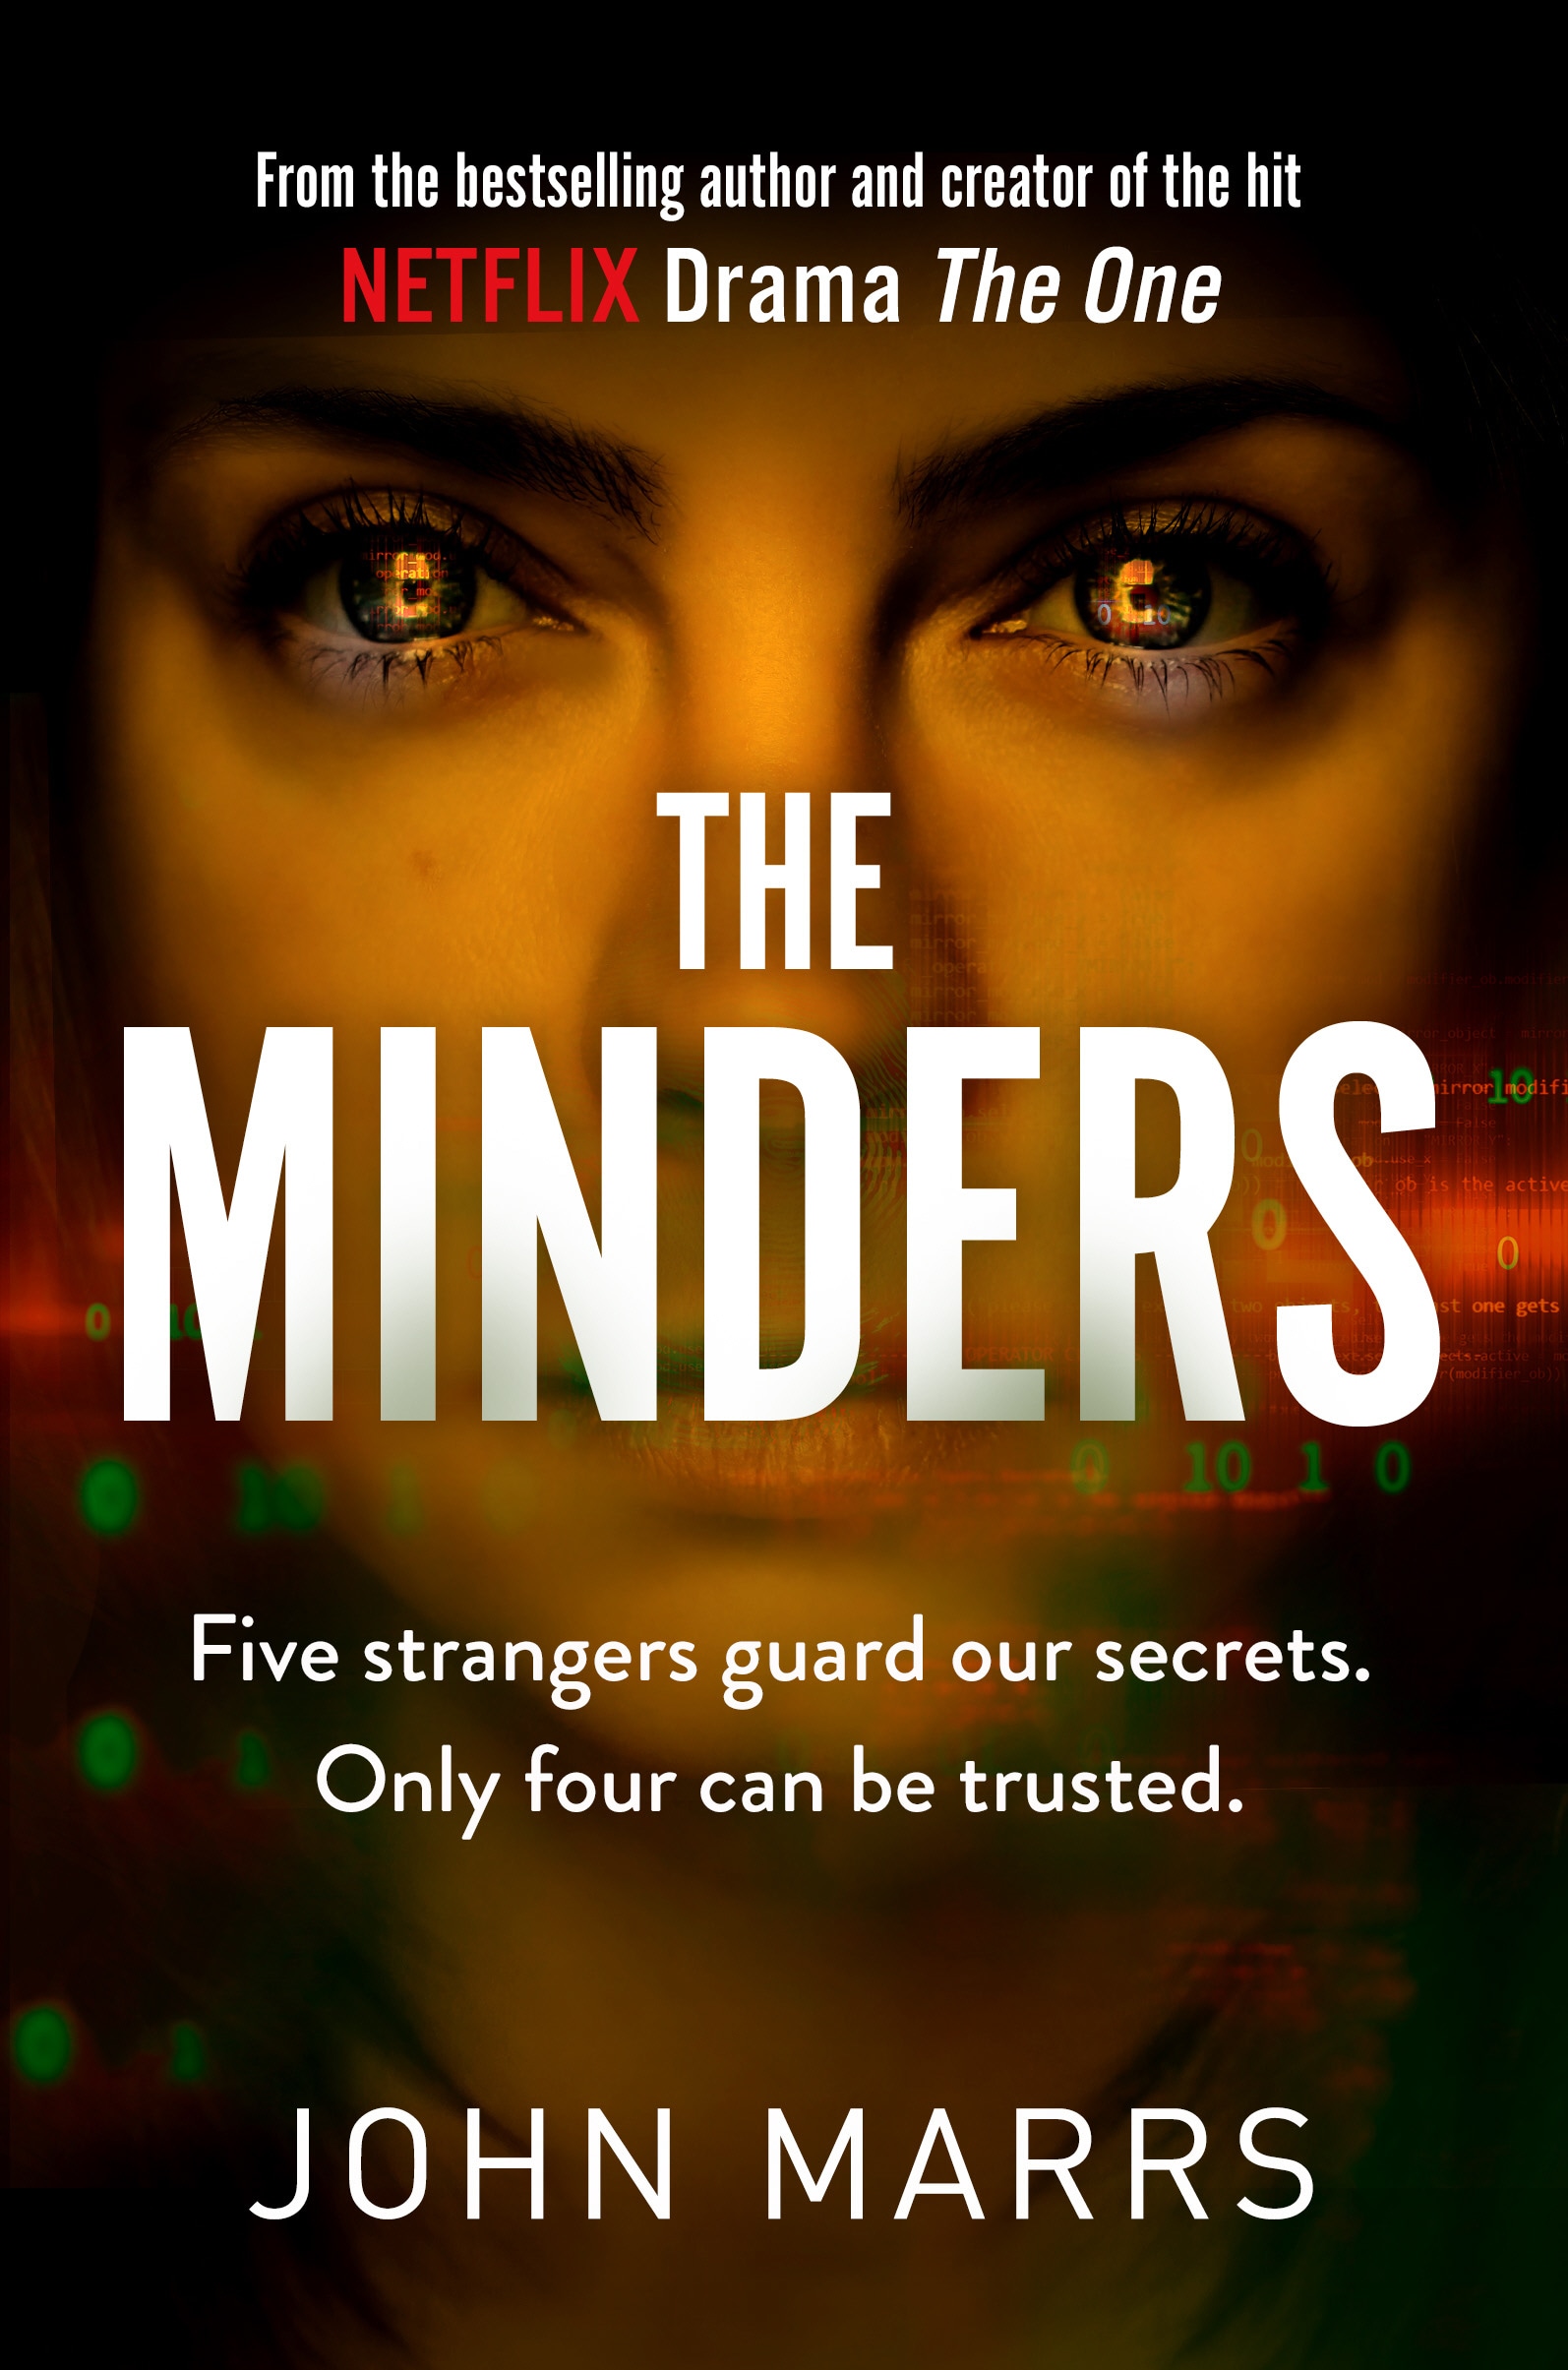 Book “The Minders” by John Marrs — September 17, 2020